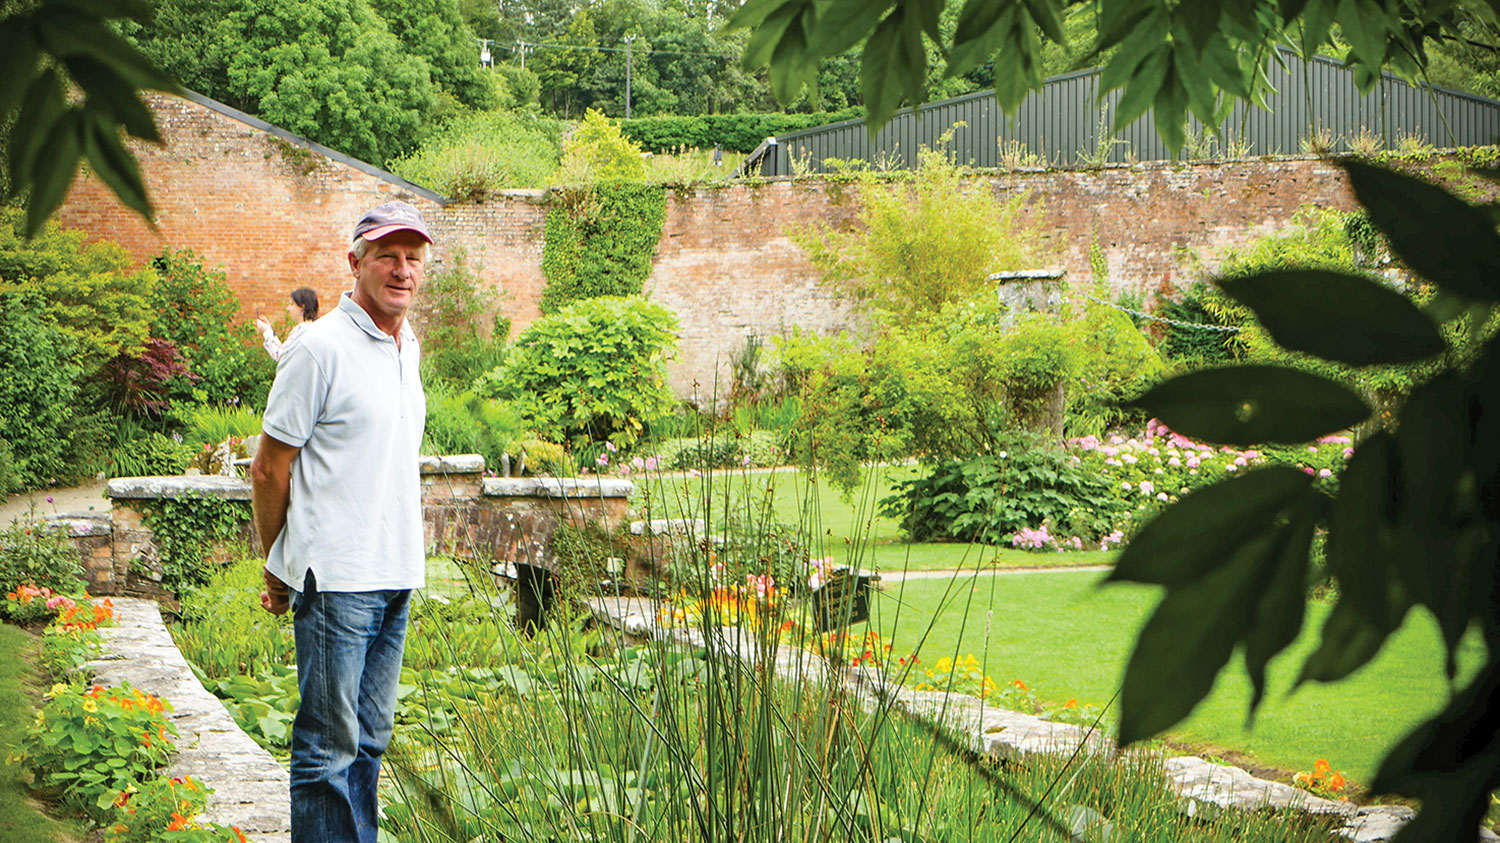 Wearing a baseball cap, polo shirt and jeans, Arthur Shackleton stands on the stone edge of a plant filled garden pond, holding his hands behind his back.